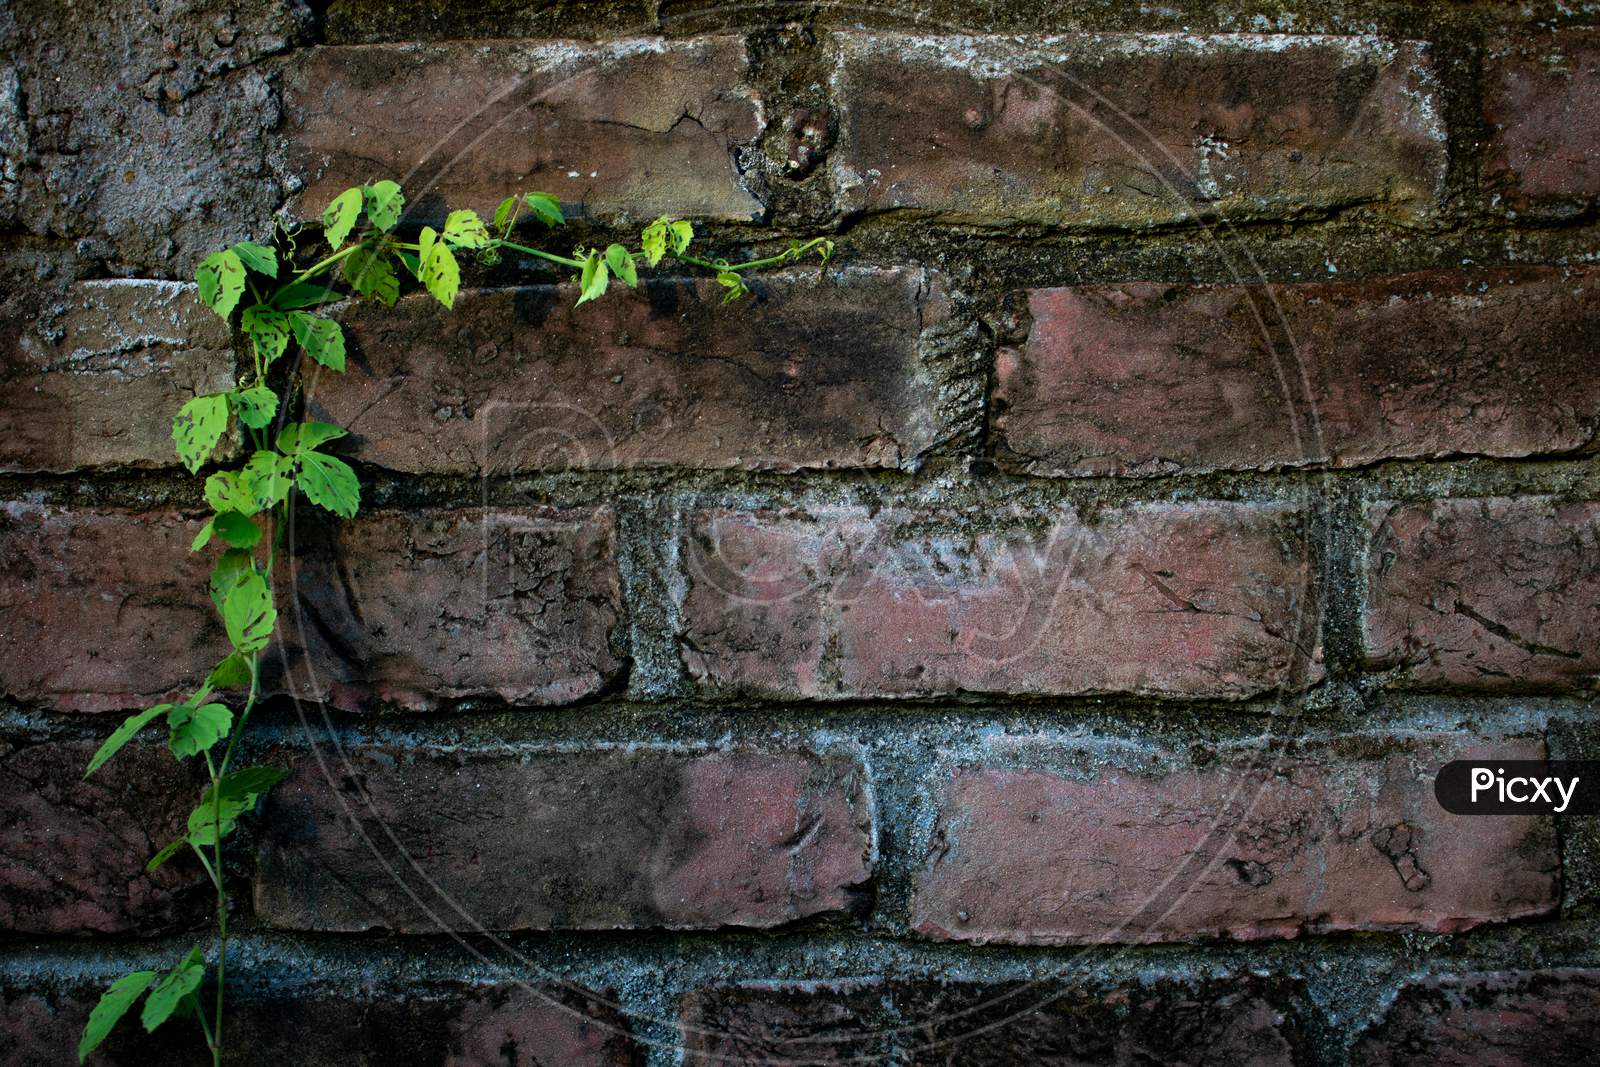 Fresh Green Moringa Leaves. The Old Brick Walls Are Covered With Green Leaves. It Can Be A Beautiful Background.